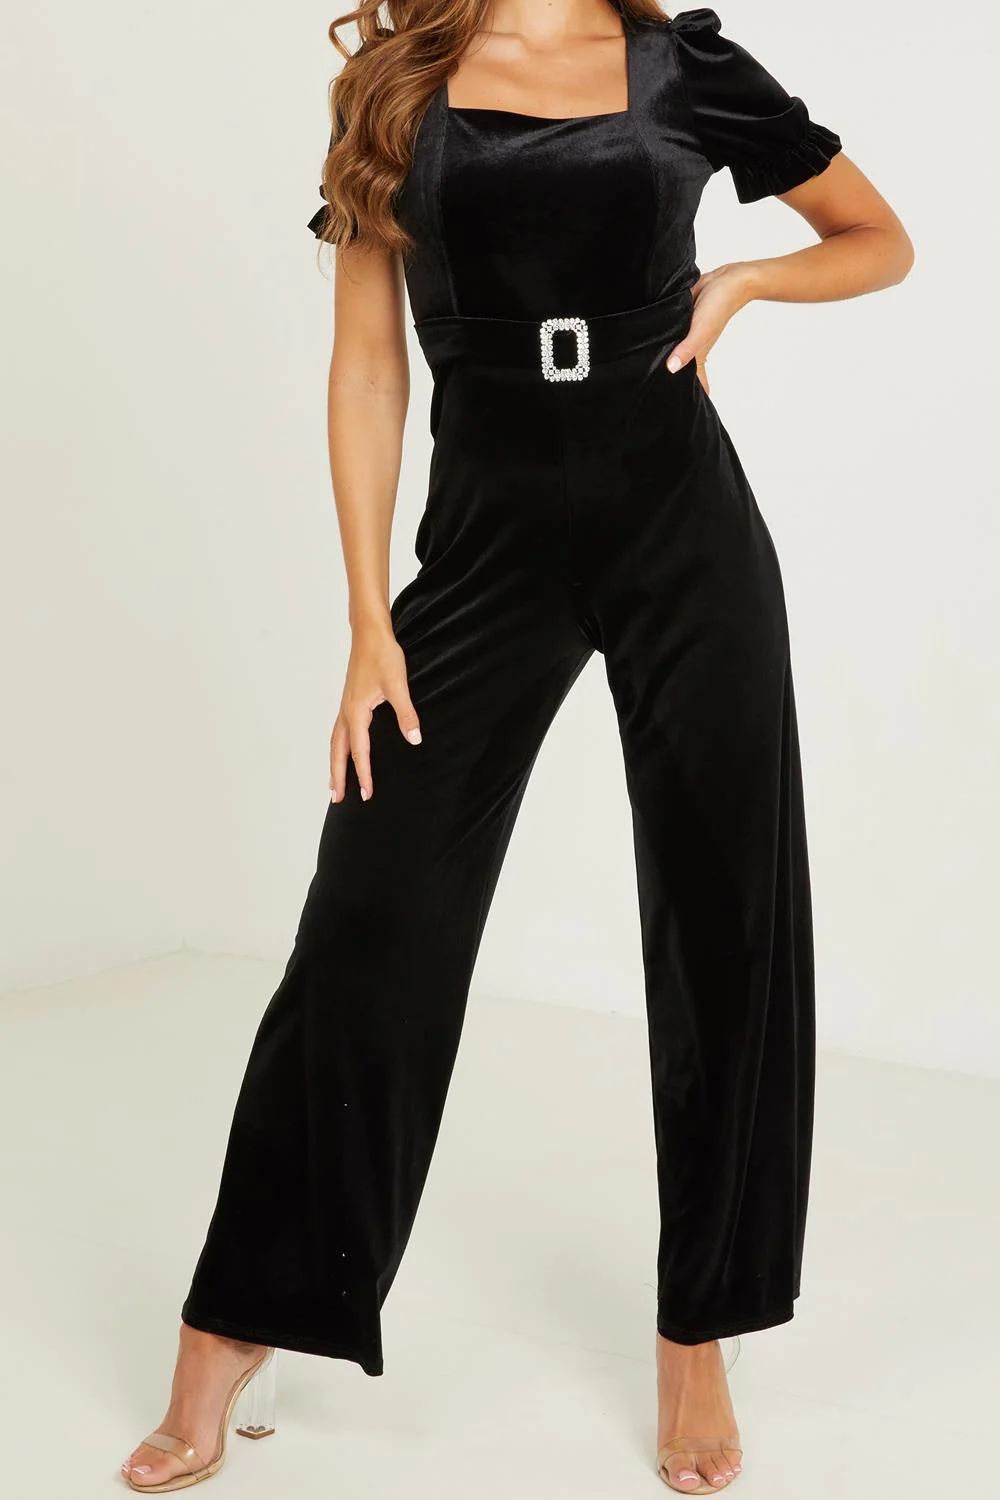 Quiz Women's Velvet Puff Sleeve Buckle Detail Palazzo Jumpsuit Dress in Black 2 Lord & Taylor | Lord & Taylor